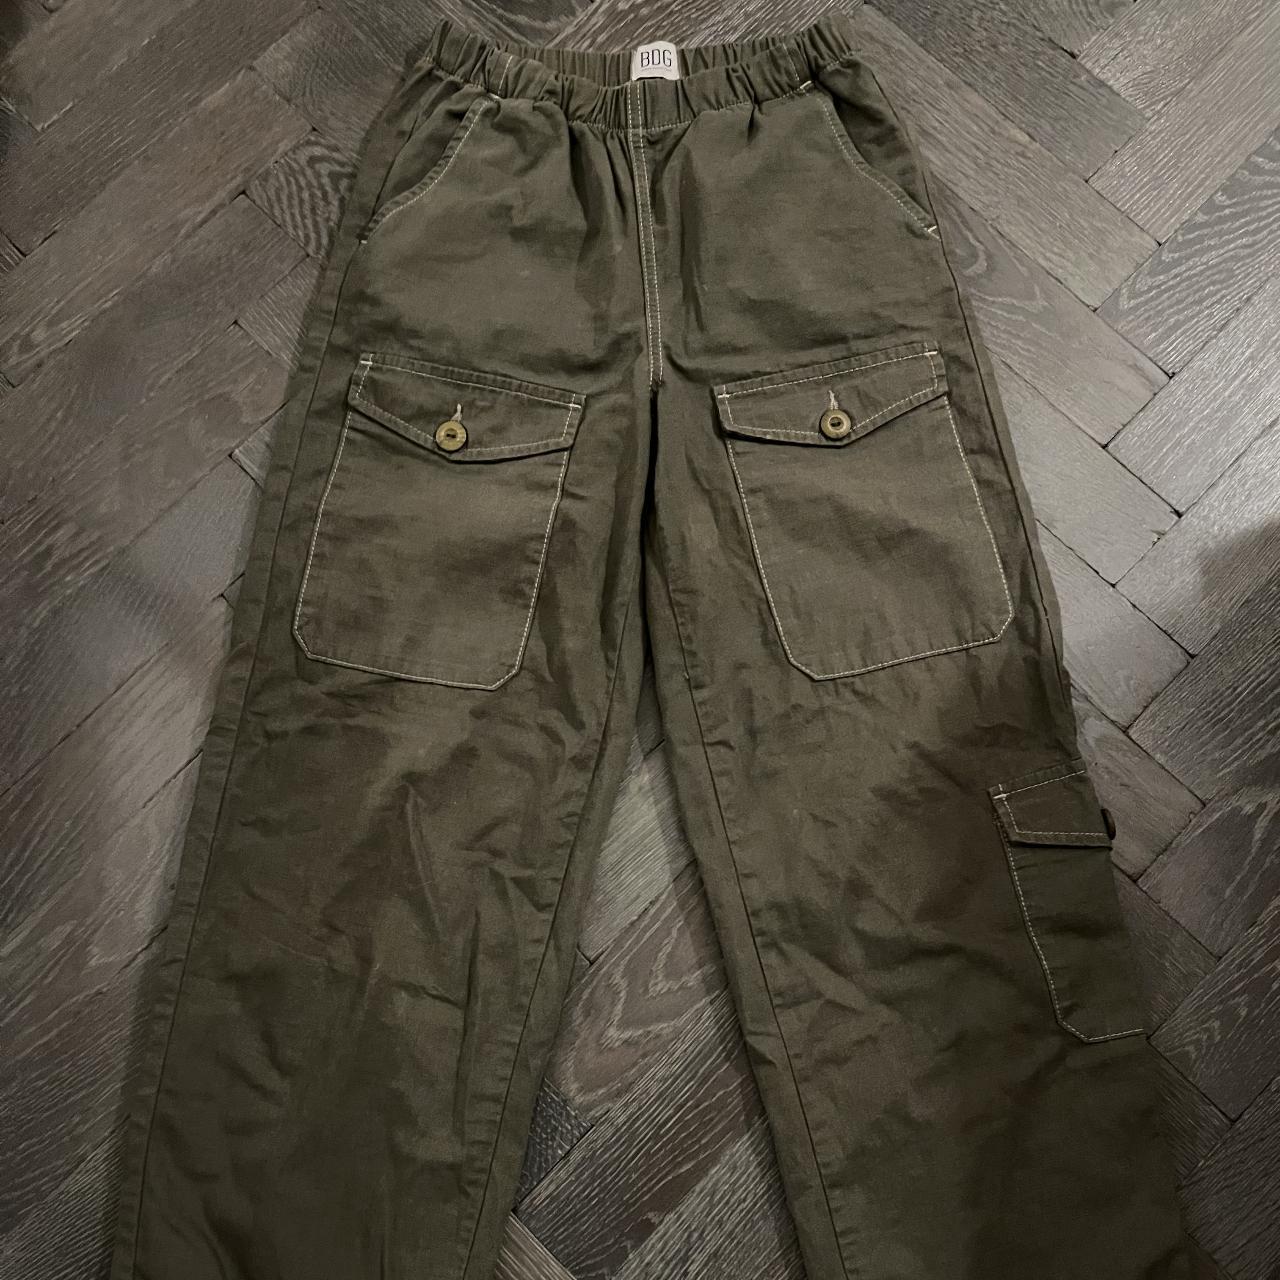 Baggy Urban Outfitters Cargos large pocket, loose... - Depop